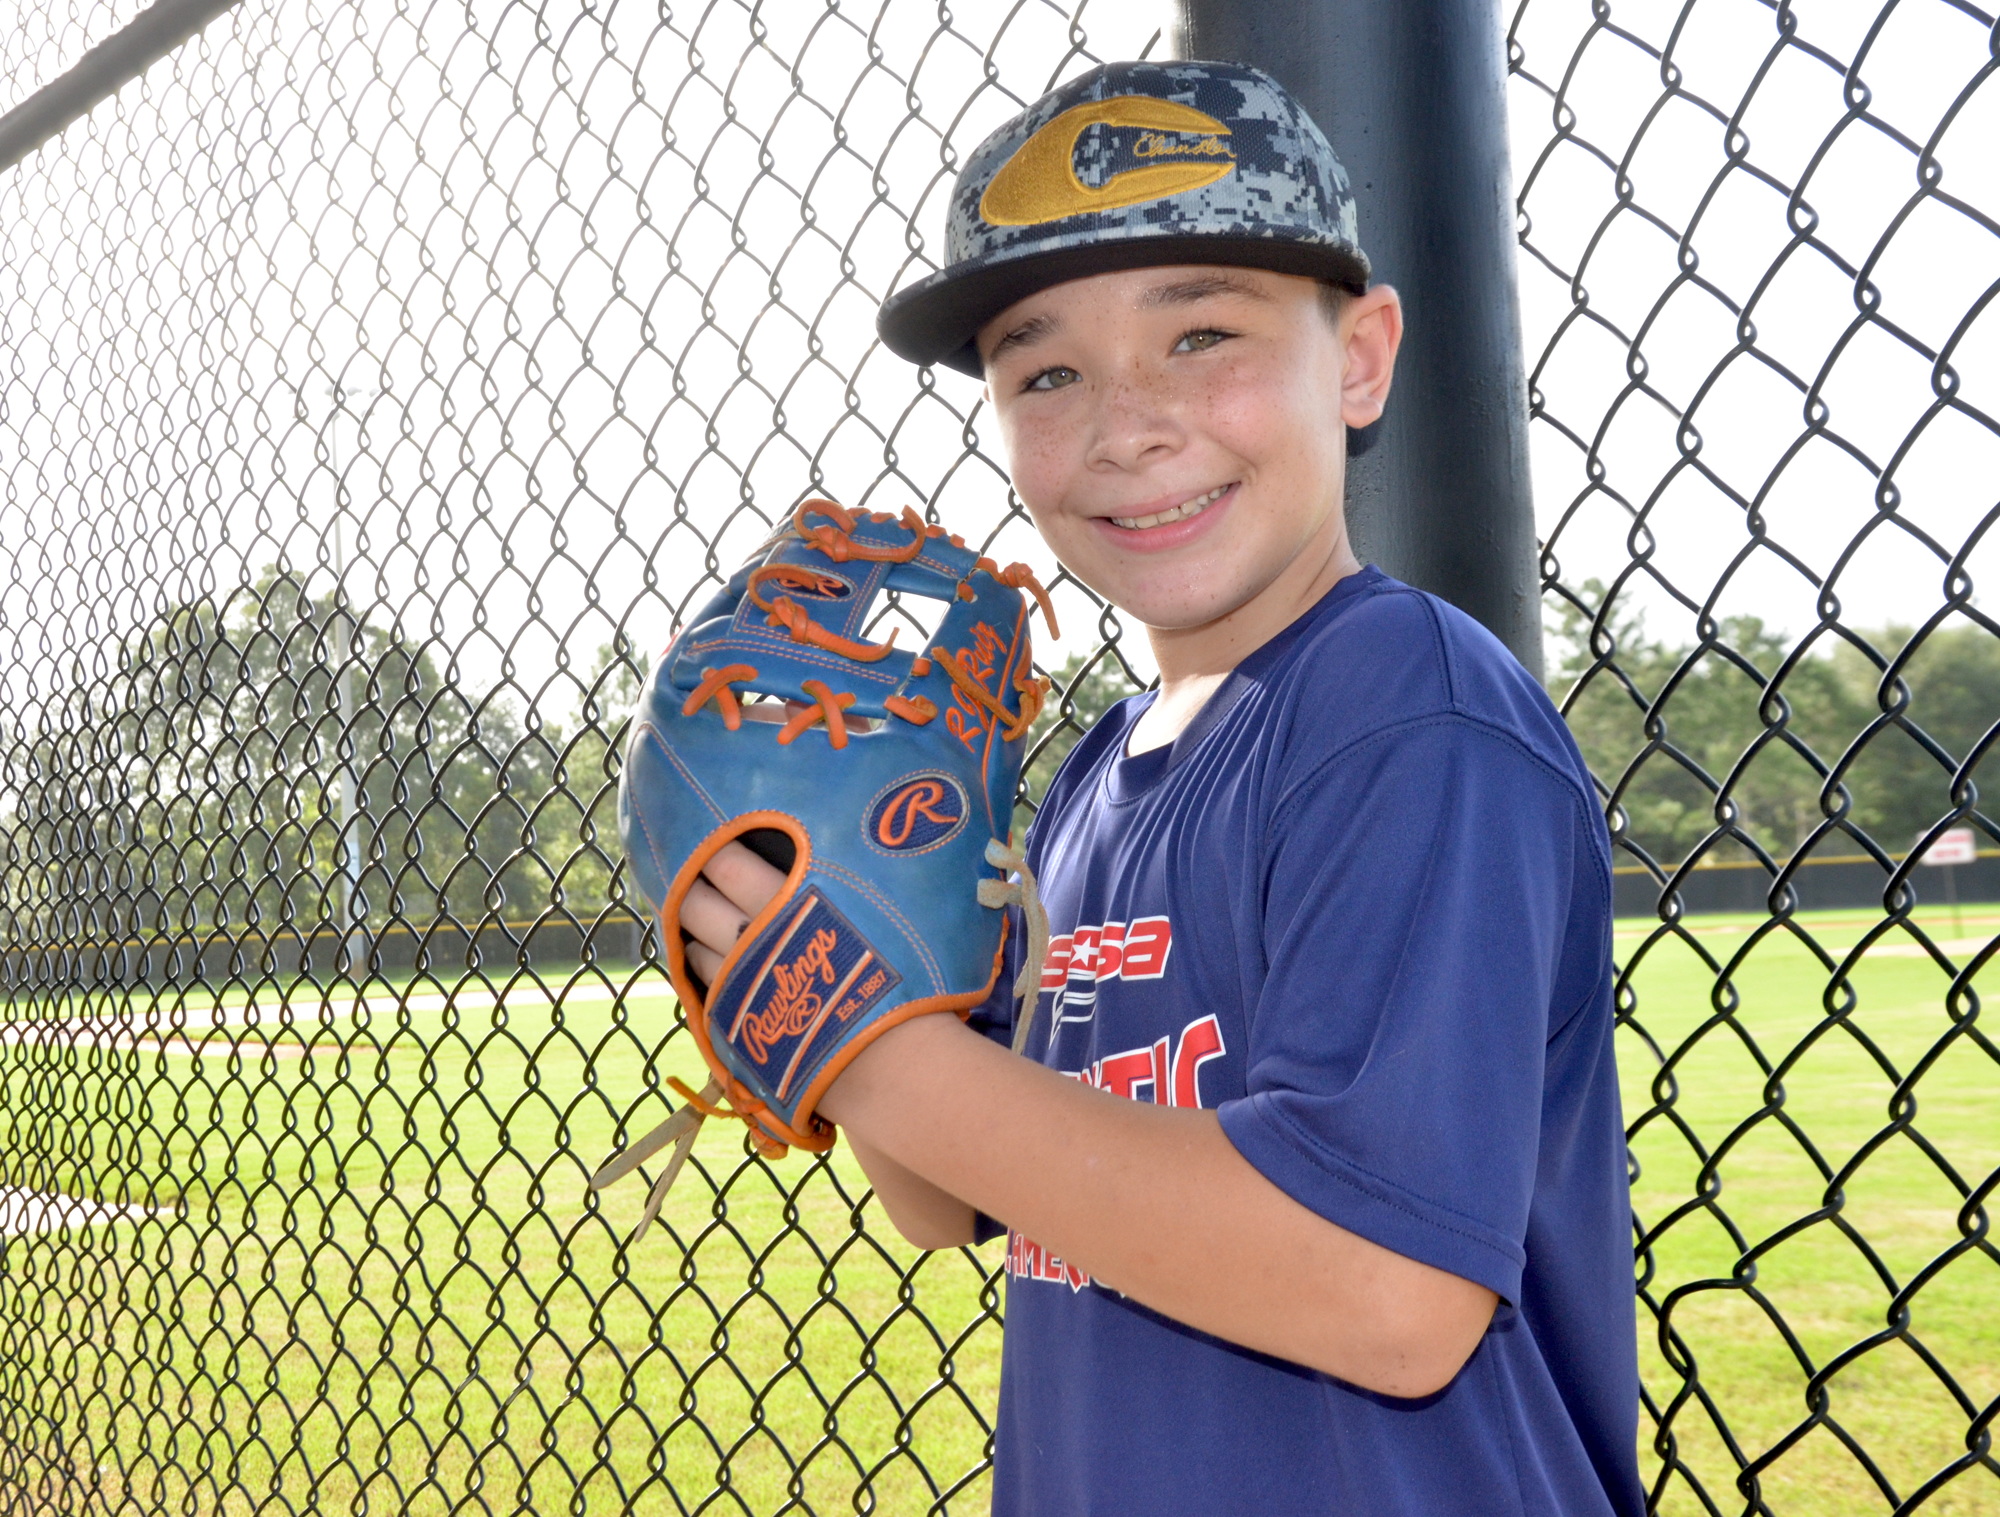 When he is pitching, Randy “RJ” Ruiz, 10, uses his fastball, changeup and a wicked slider.